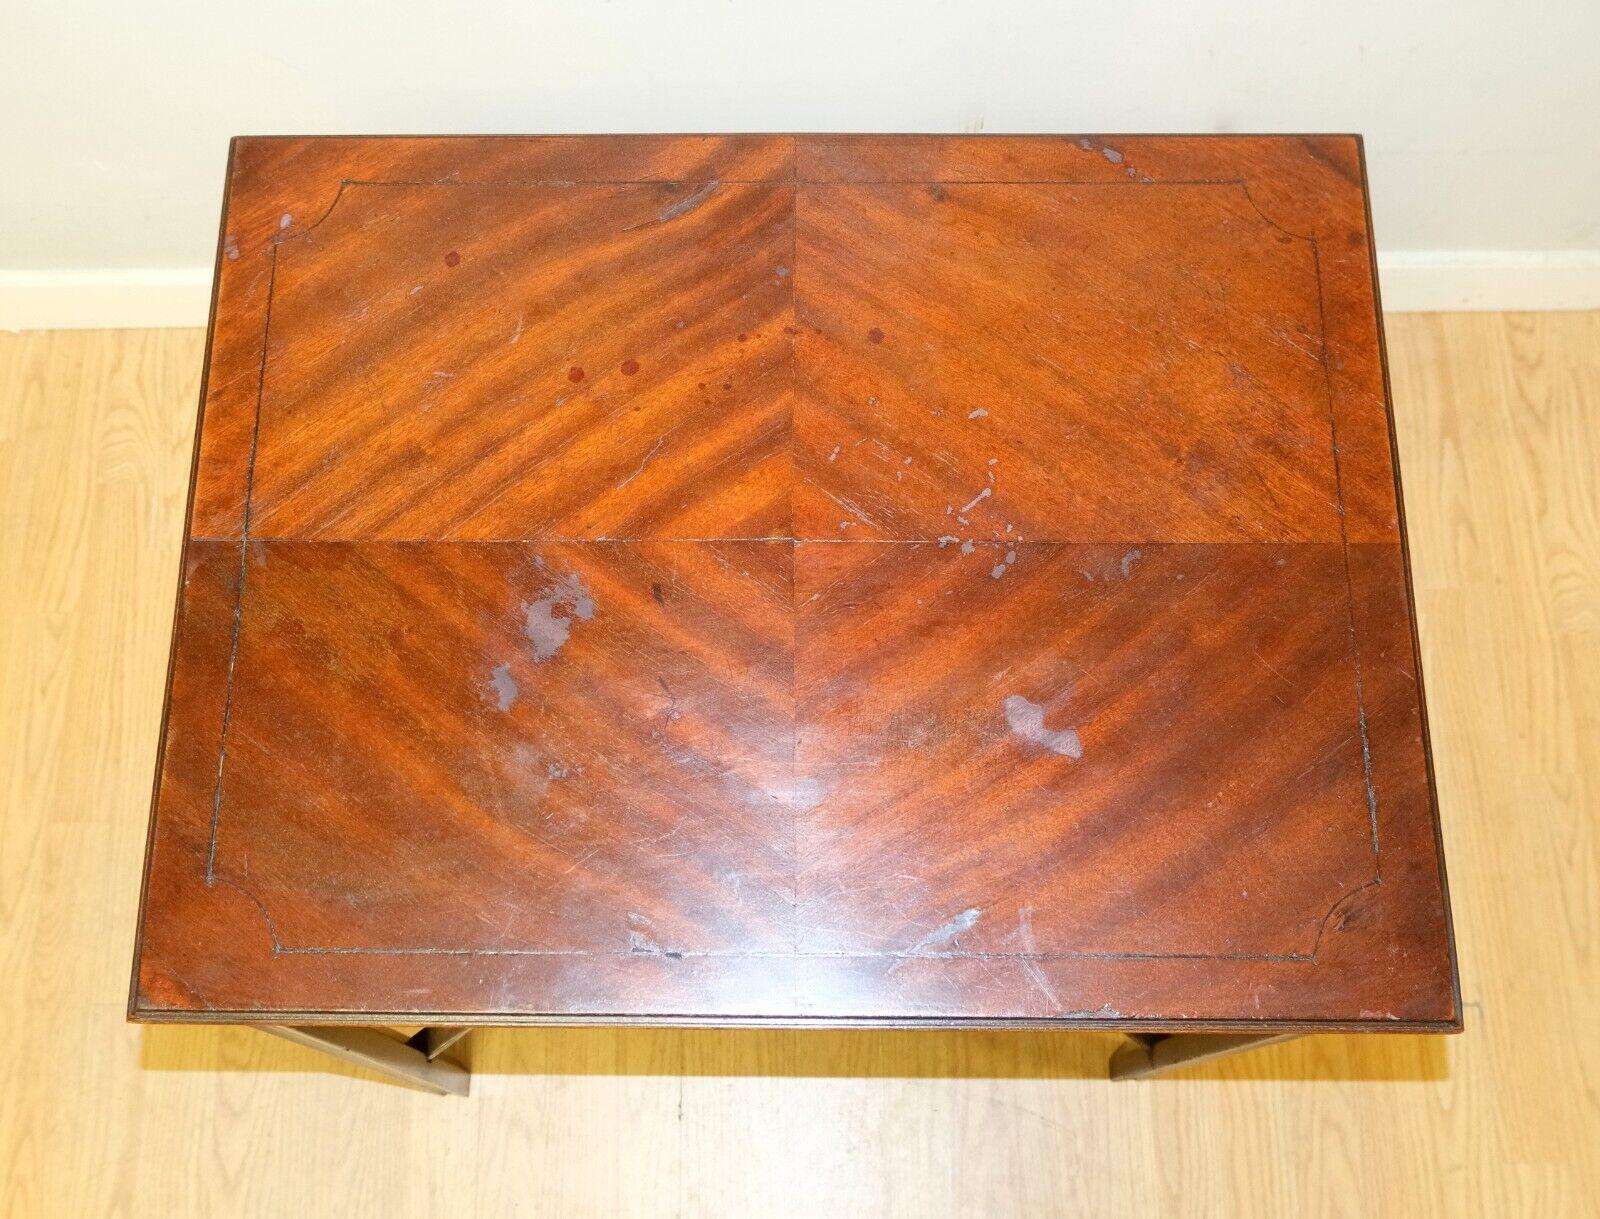 LOVELY ANTIQUE EDWARDIAN HARDWOOD SiDE TABLE STRAIGHT LEGS & CARVING For Sale 2